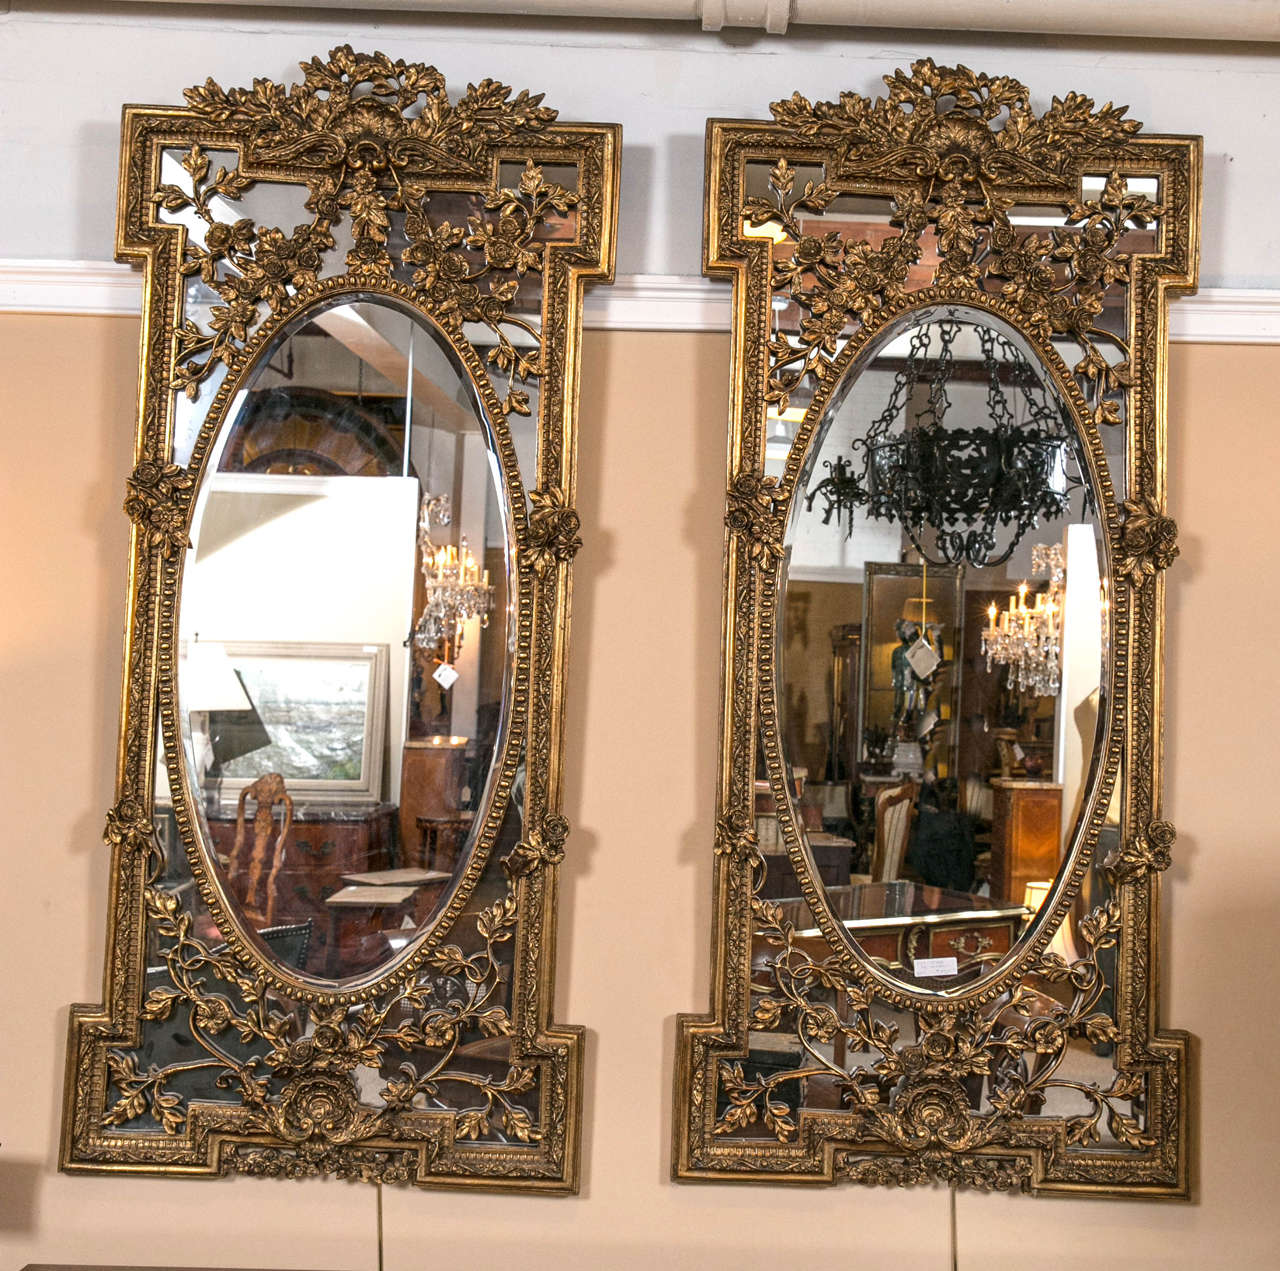 Pair of lovely giltwood and gesso beveled wall console mirrors in the Belle Époque style, second quarter of 20th century, the oval center beveled panel with annulated molding surmounted by elaborately carved rectangular reeded frame, decorated with